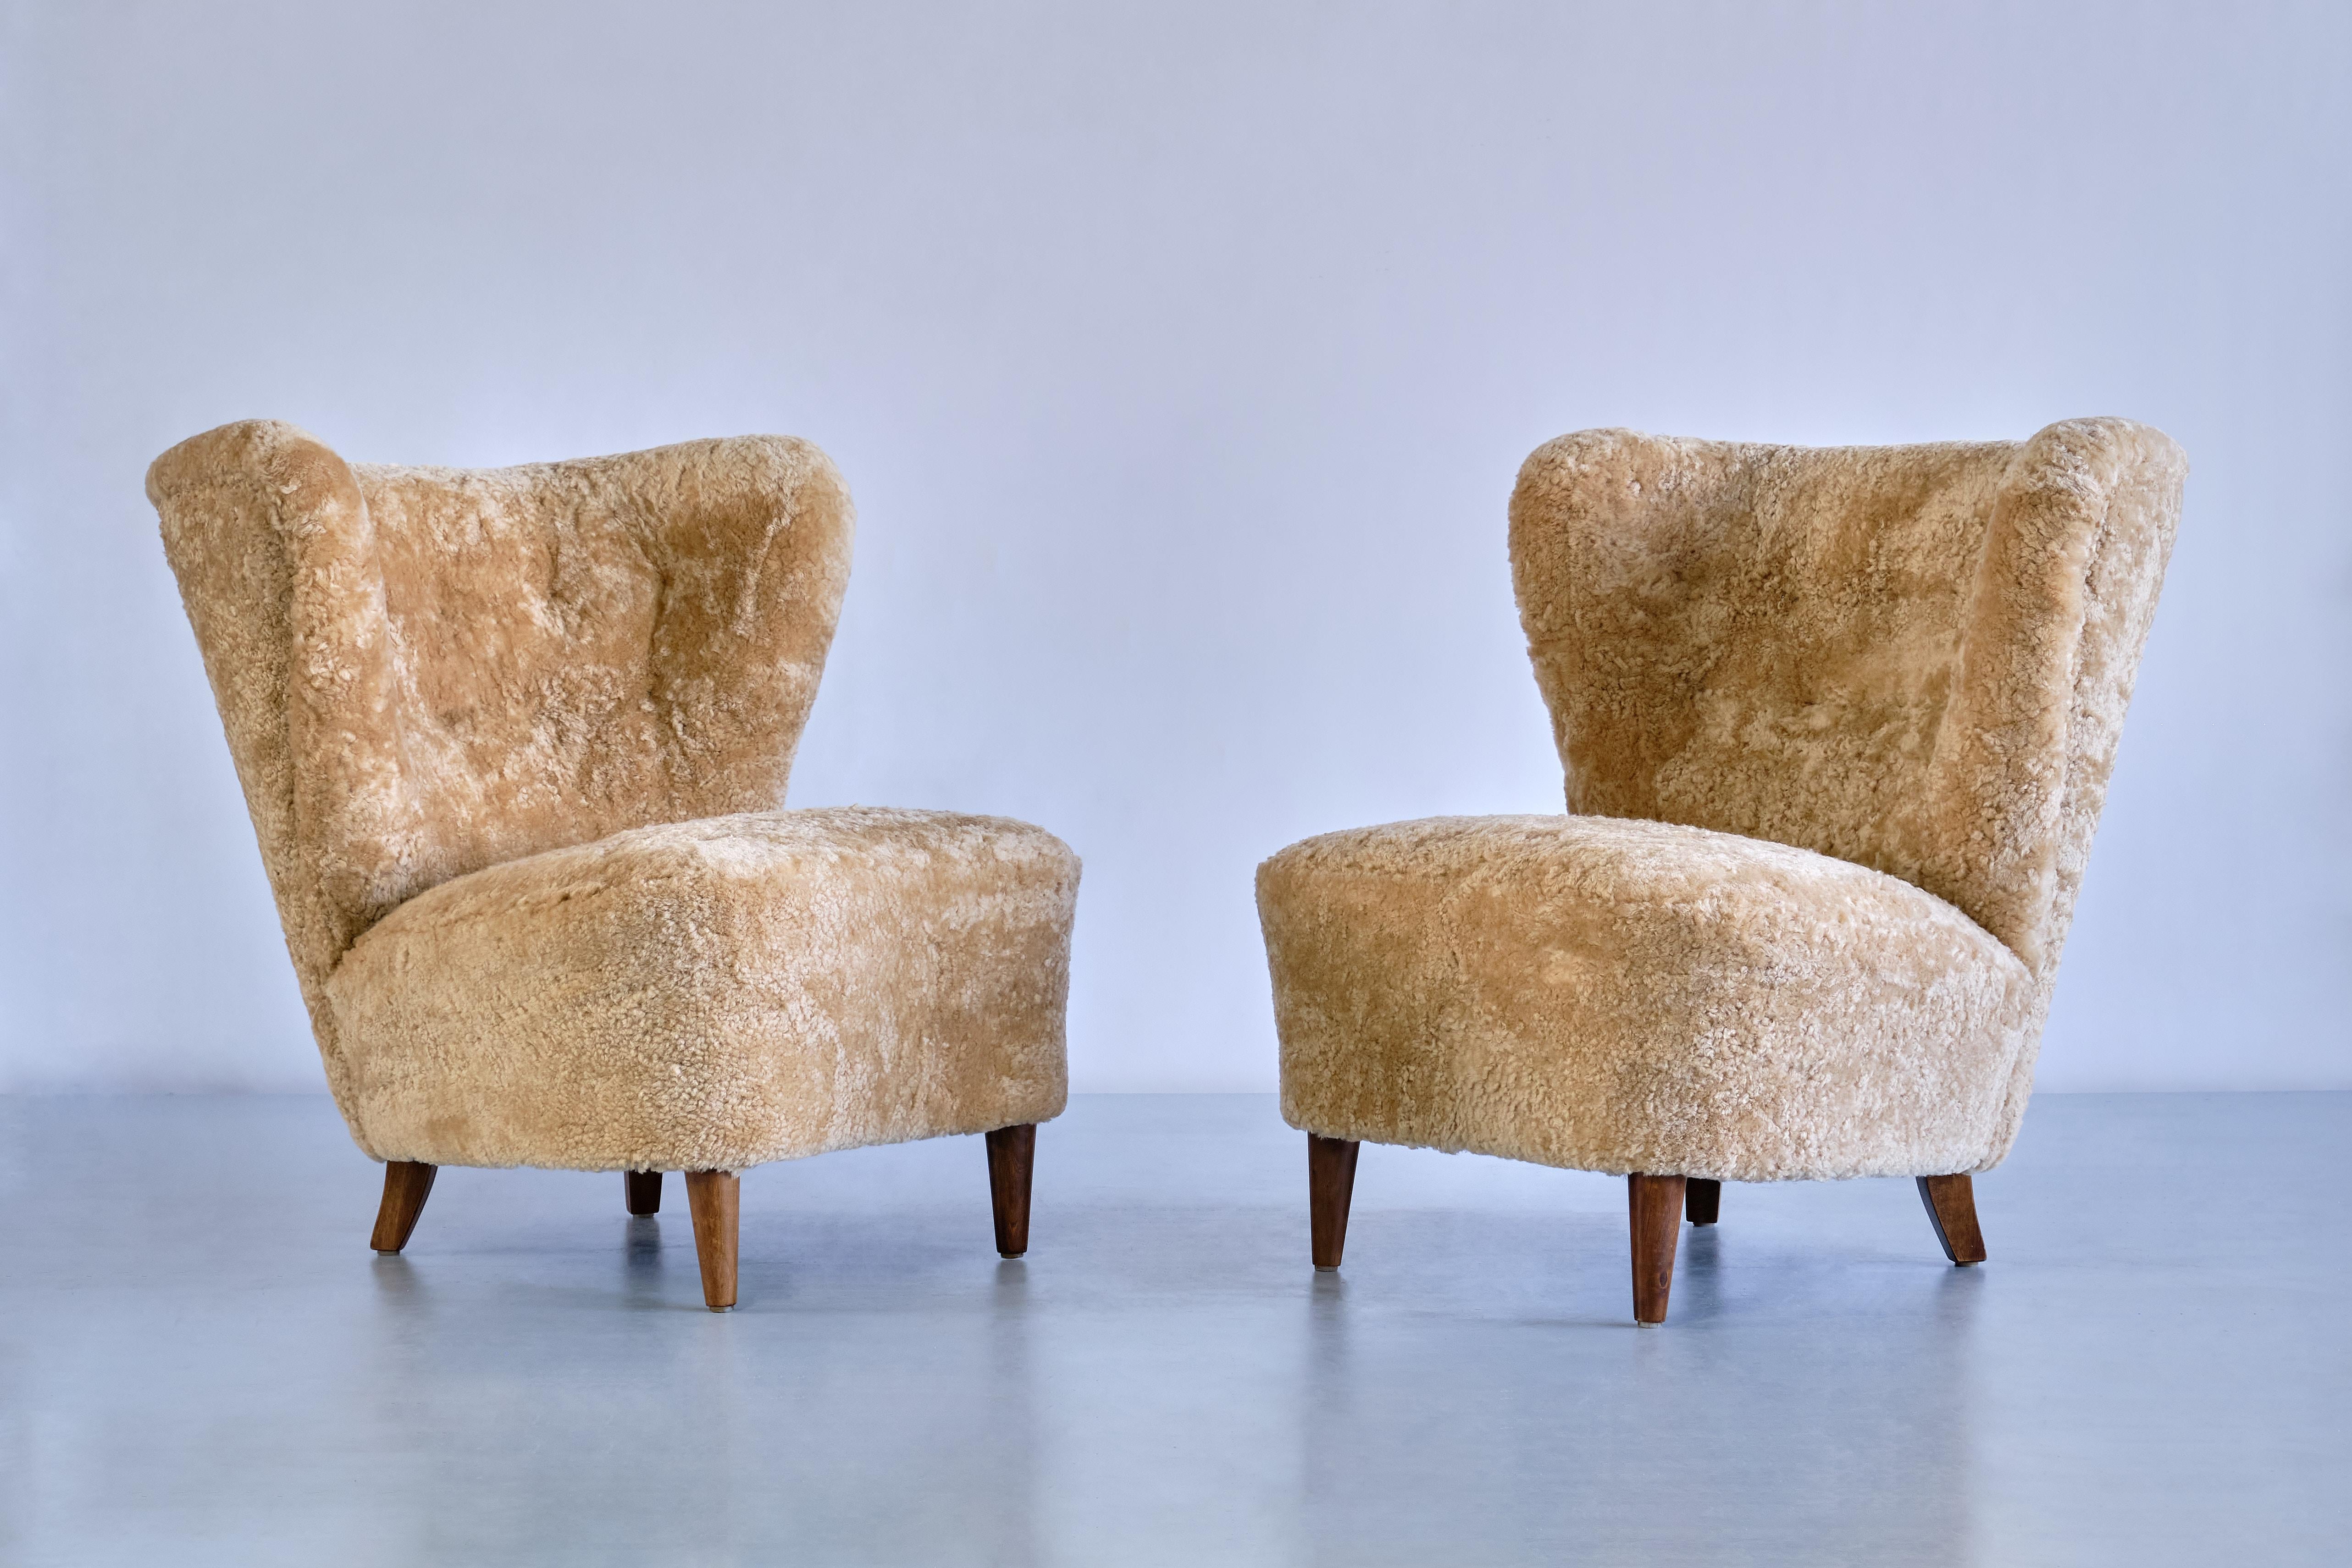 Pair of Johannes Brynte Lounge Chairs in Sheepskin and Ash Wood, Sweden, 1940s For Sale 9